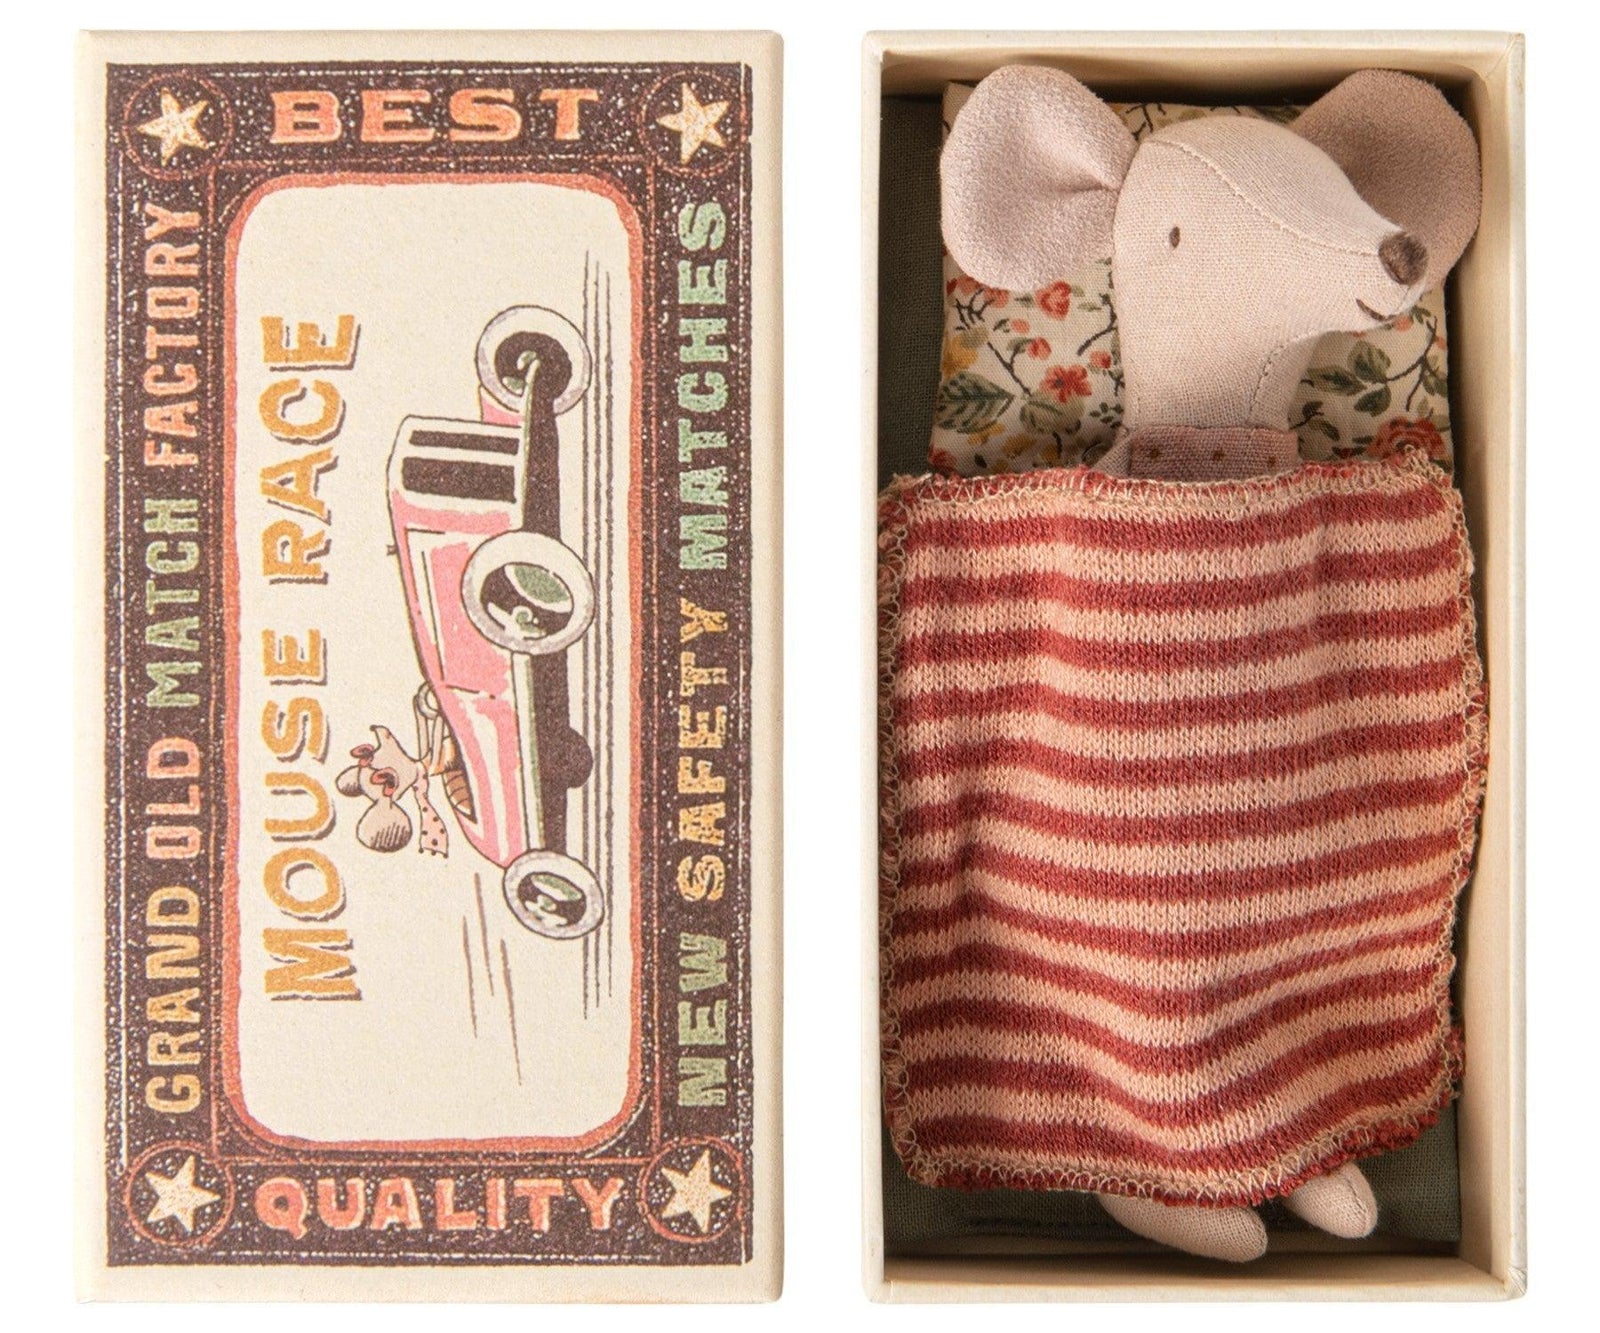 Maileg: Pea mouse in box Big Sister in Matchbox 12 cm